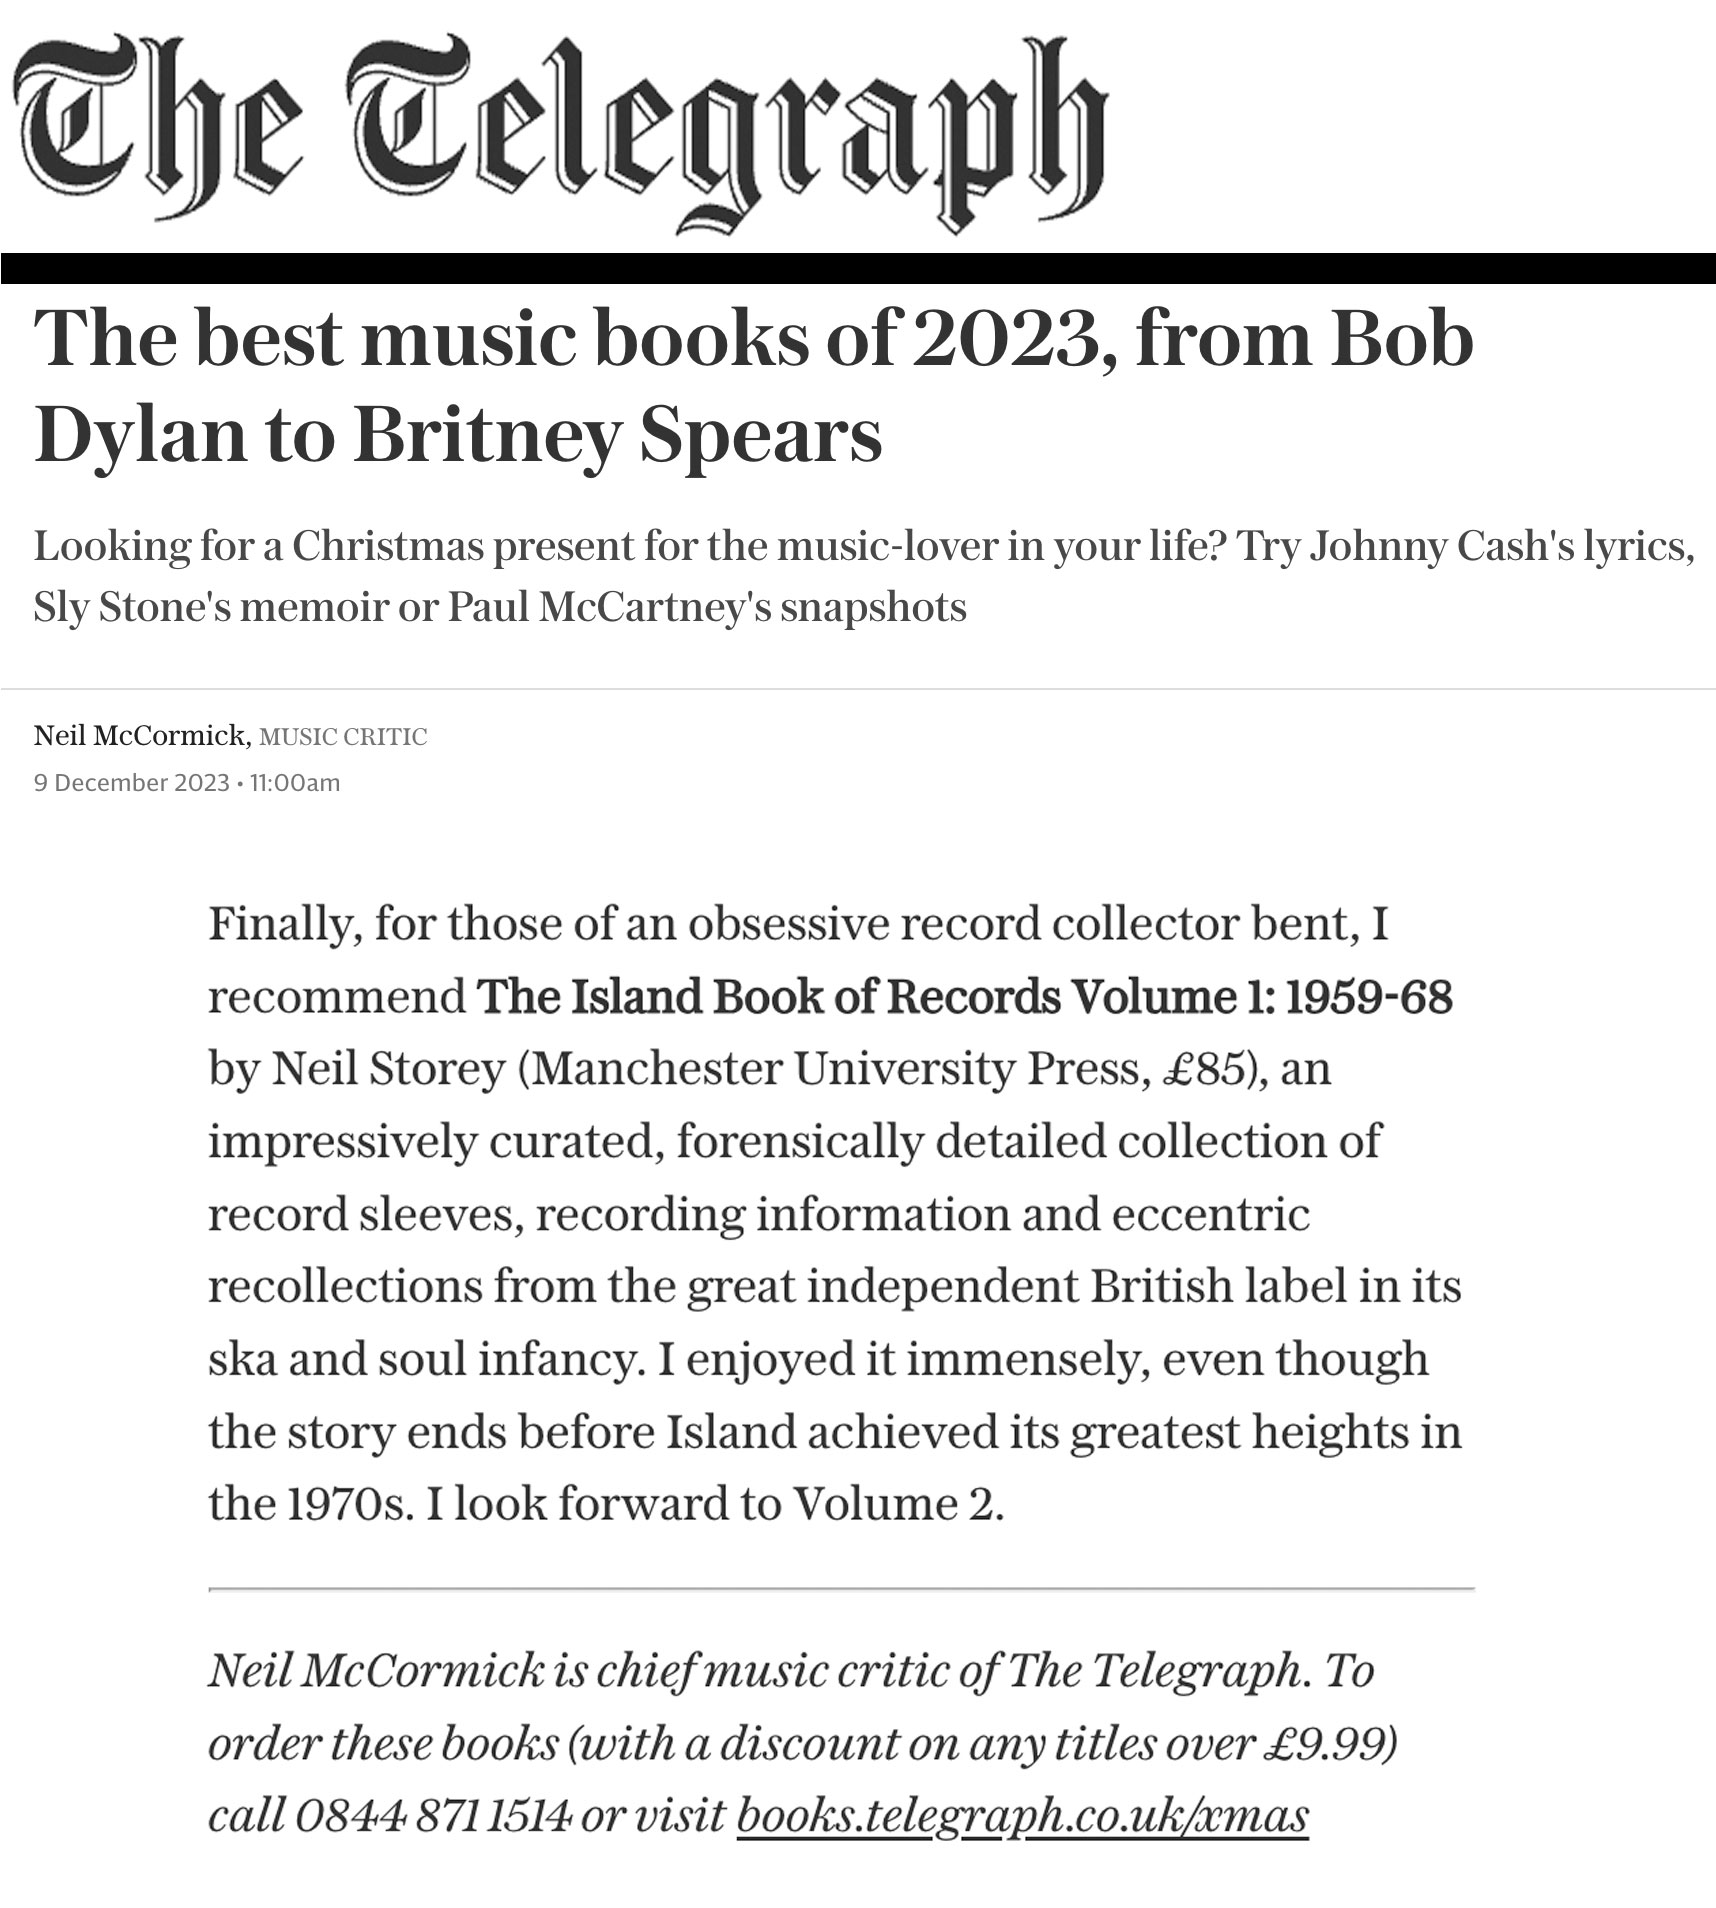 IBoR named one of the Best Music Books of 2023 by the Daily Telegraph